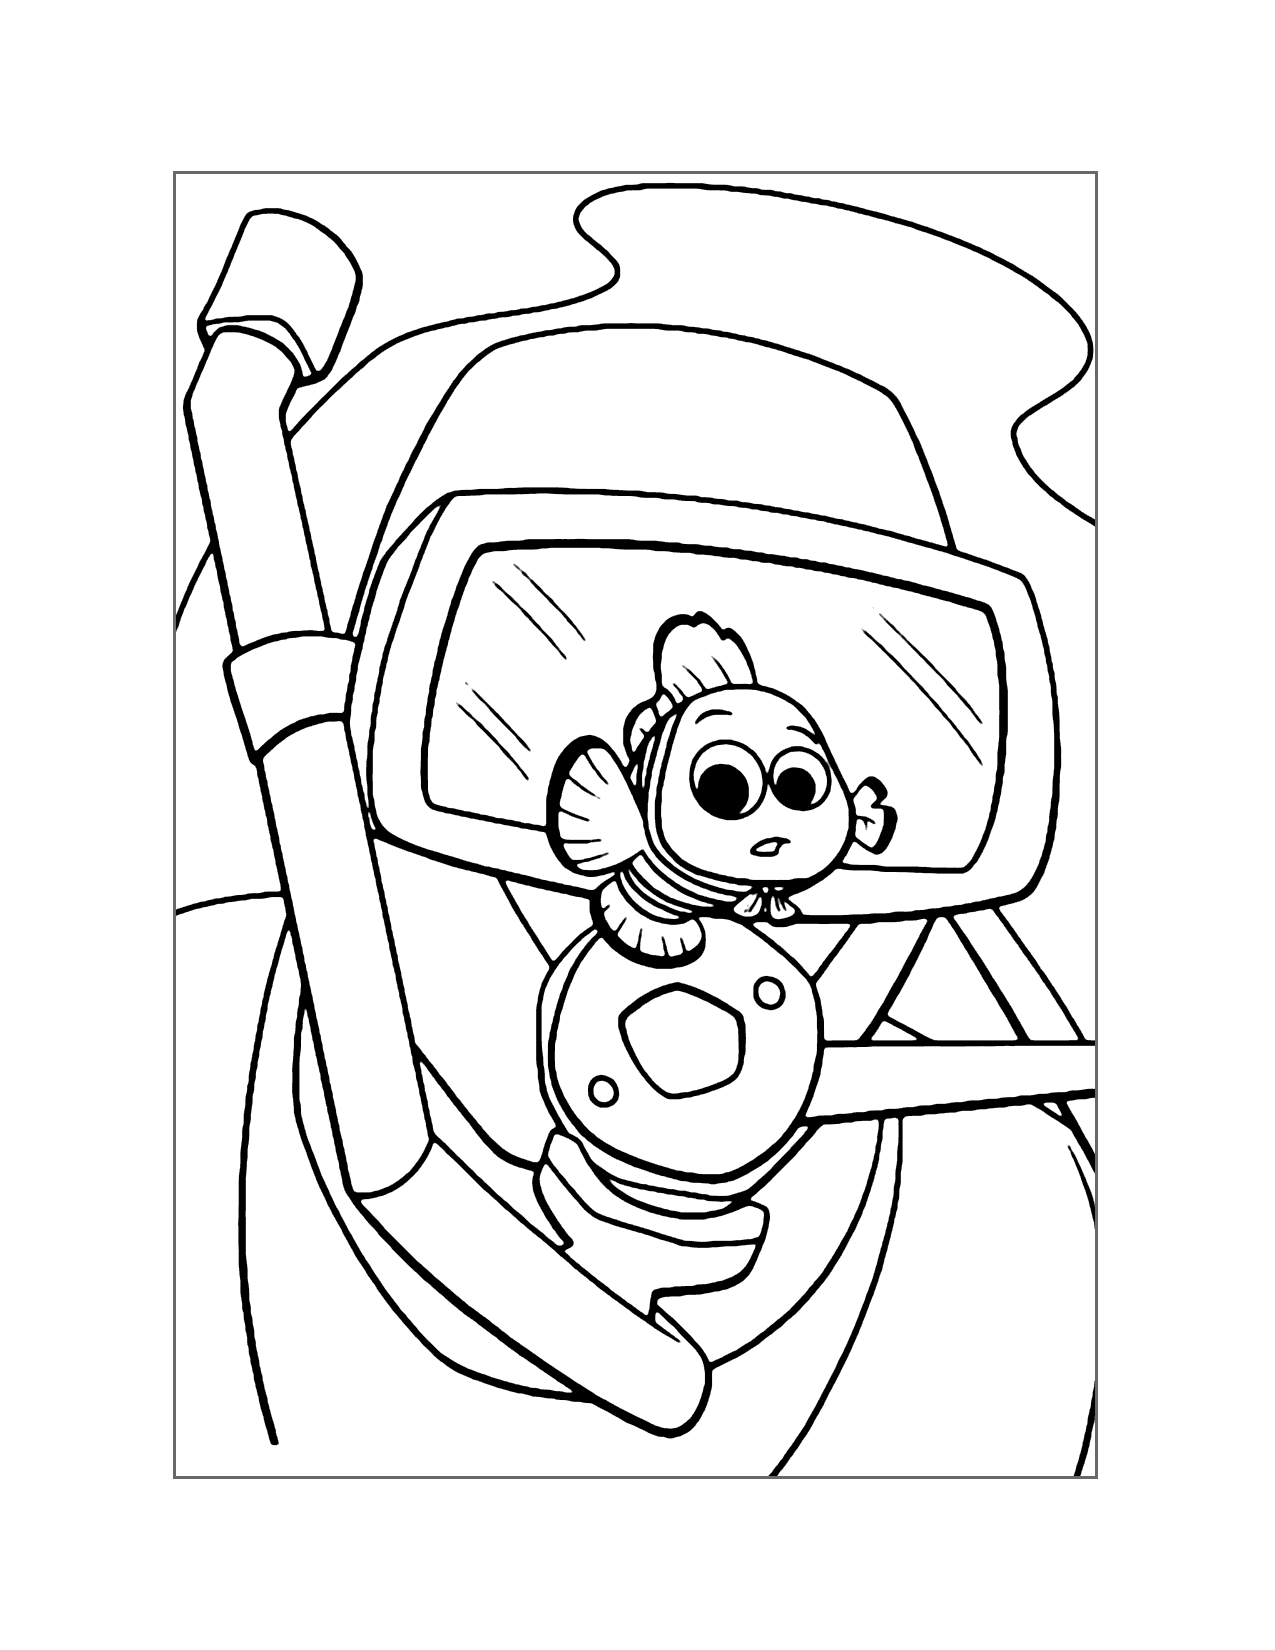 Diver Finds Nemo Coloring Page